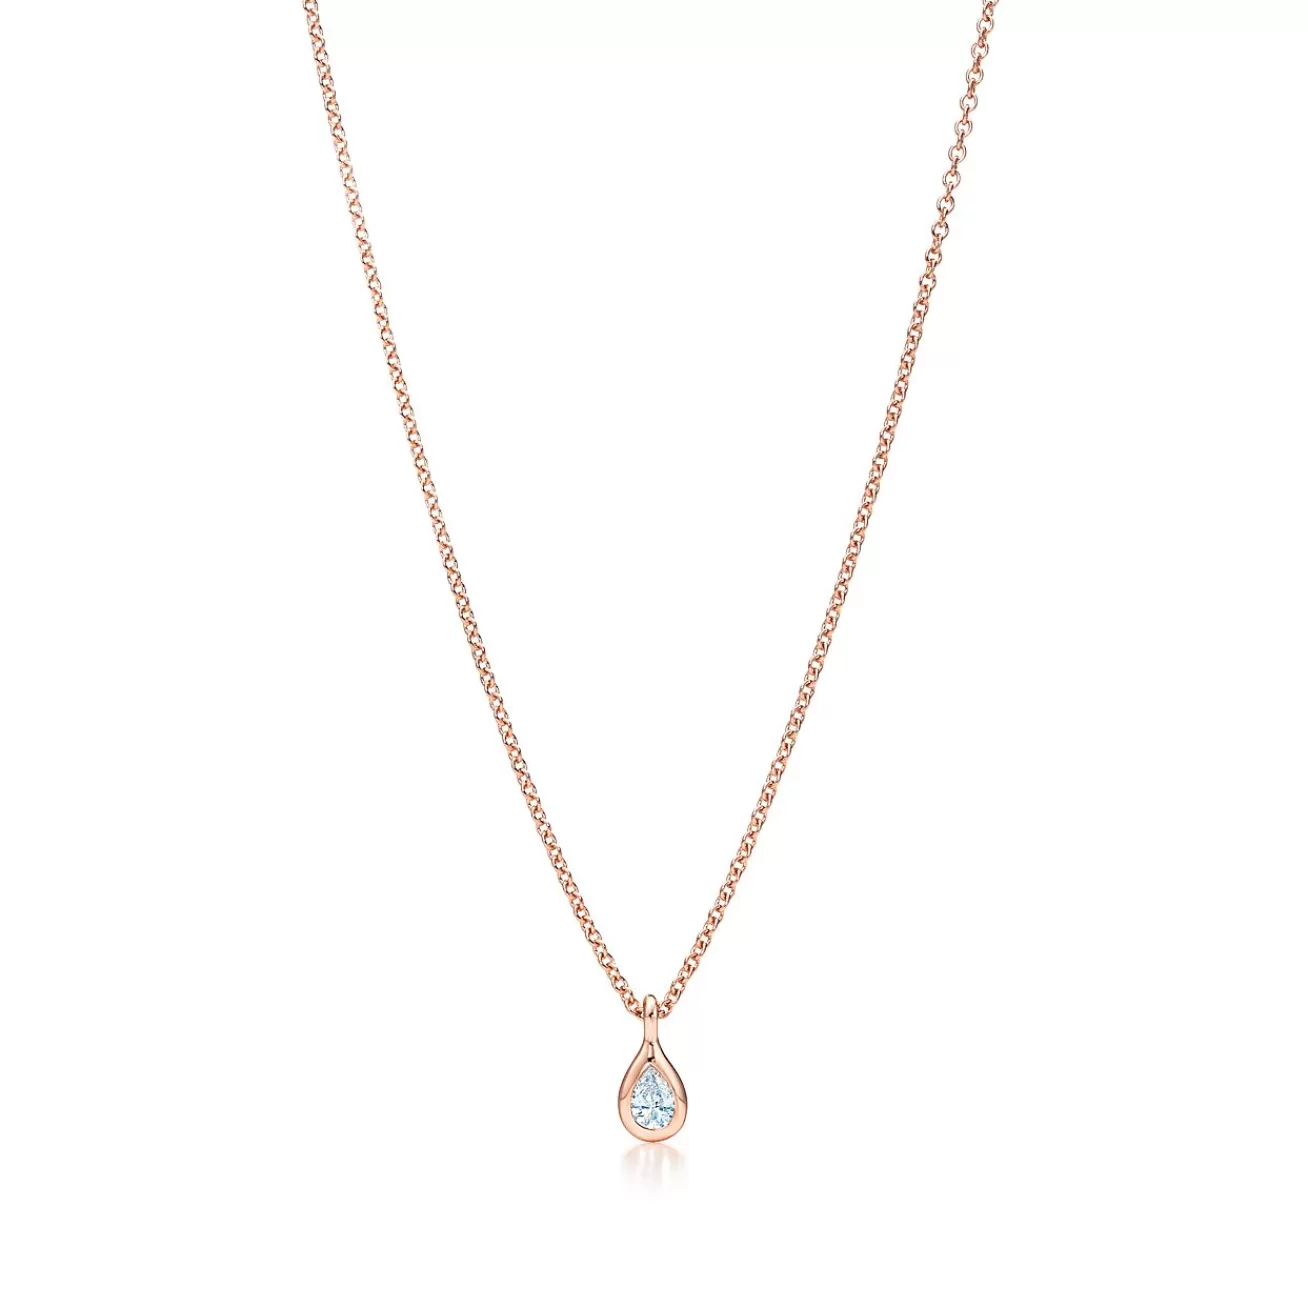 Tiffany & Co. Elsa Peretti® Diamonds by the Yard® pendant in 18k rose gold. | ^ Necklaces & Pendants | Rose Gold Jewelry